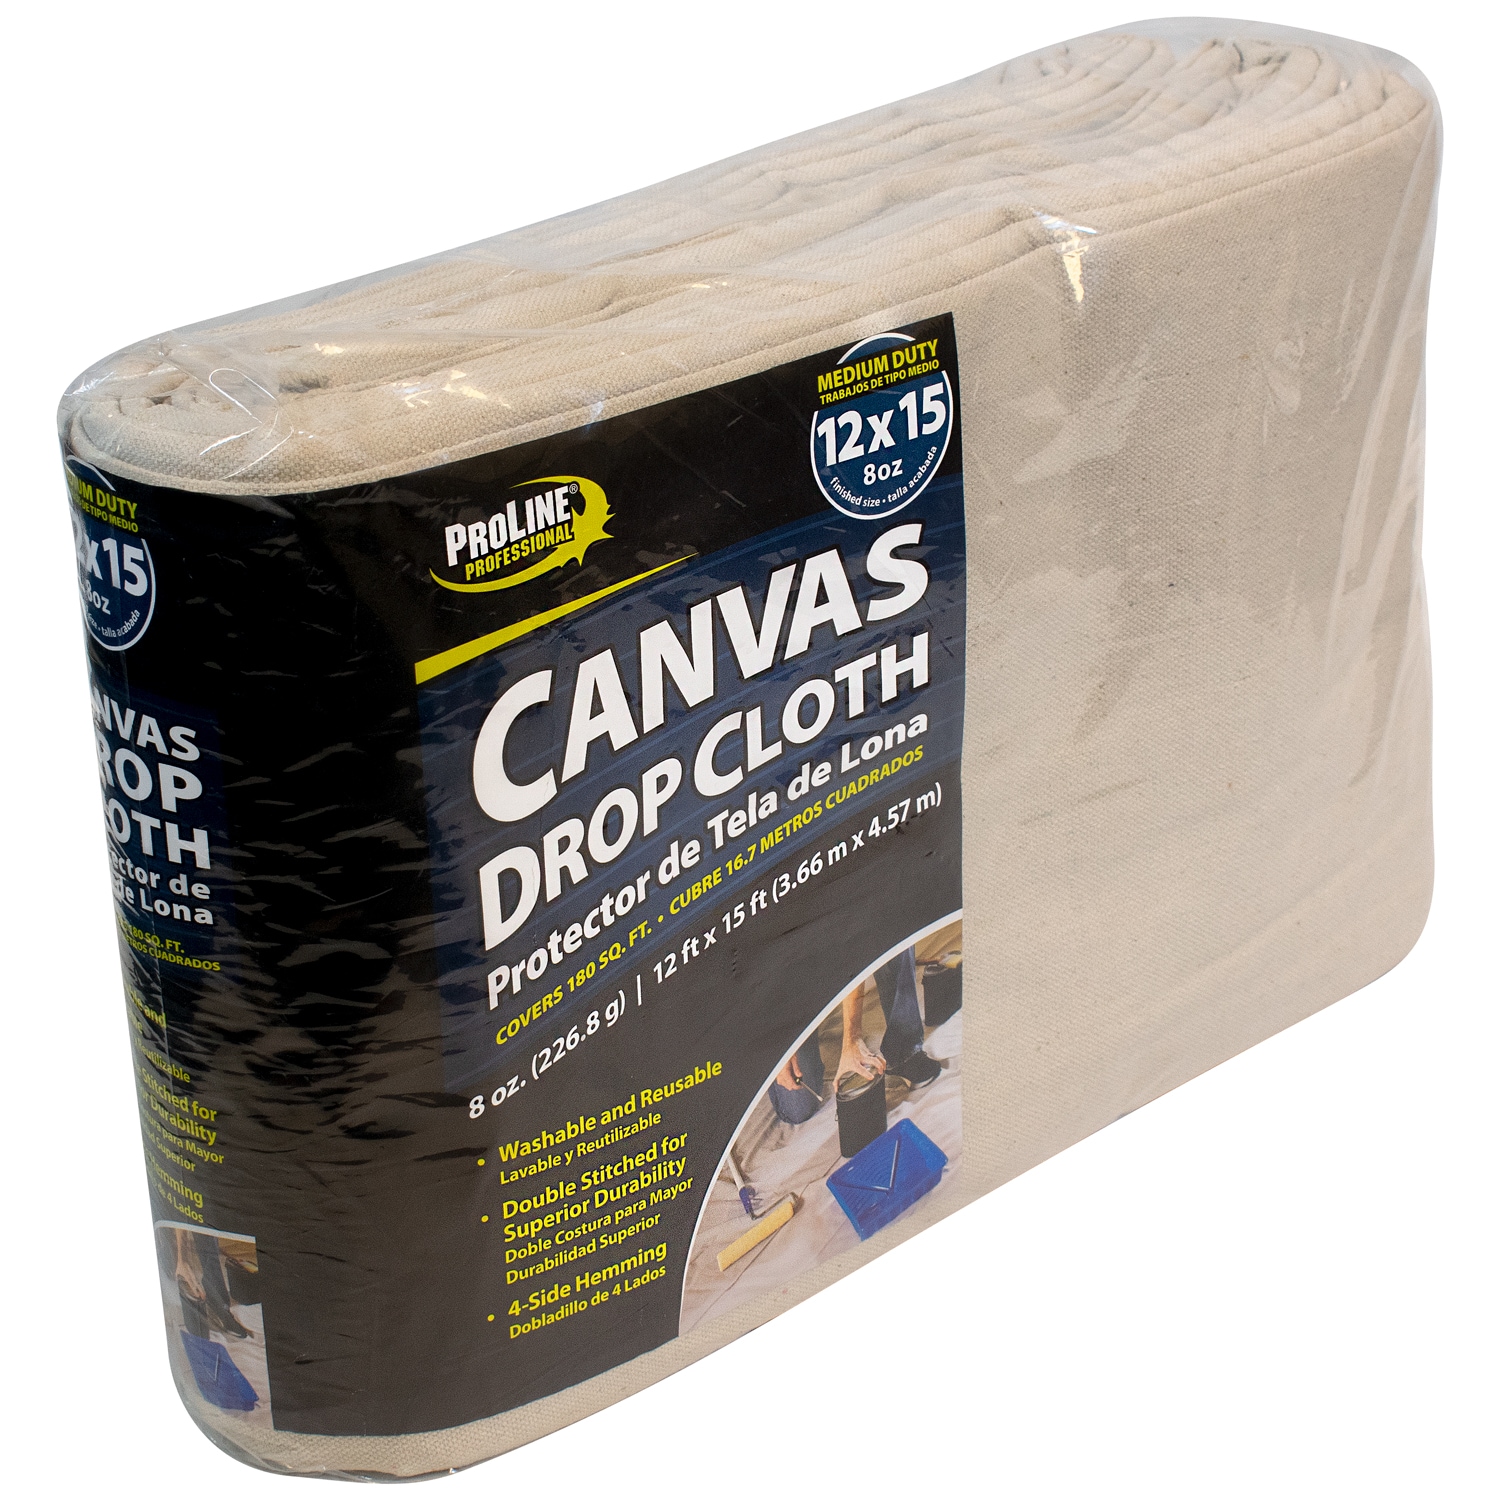 Canvas Drop Cloth for Painting 12X15 Ft�All Purpose Canvas Tarp for